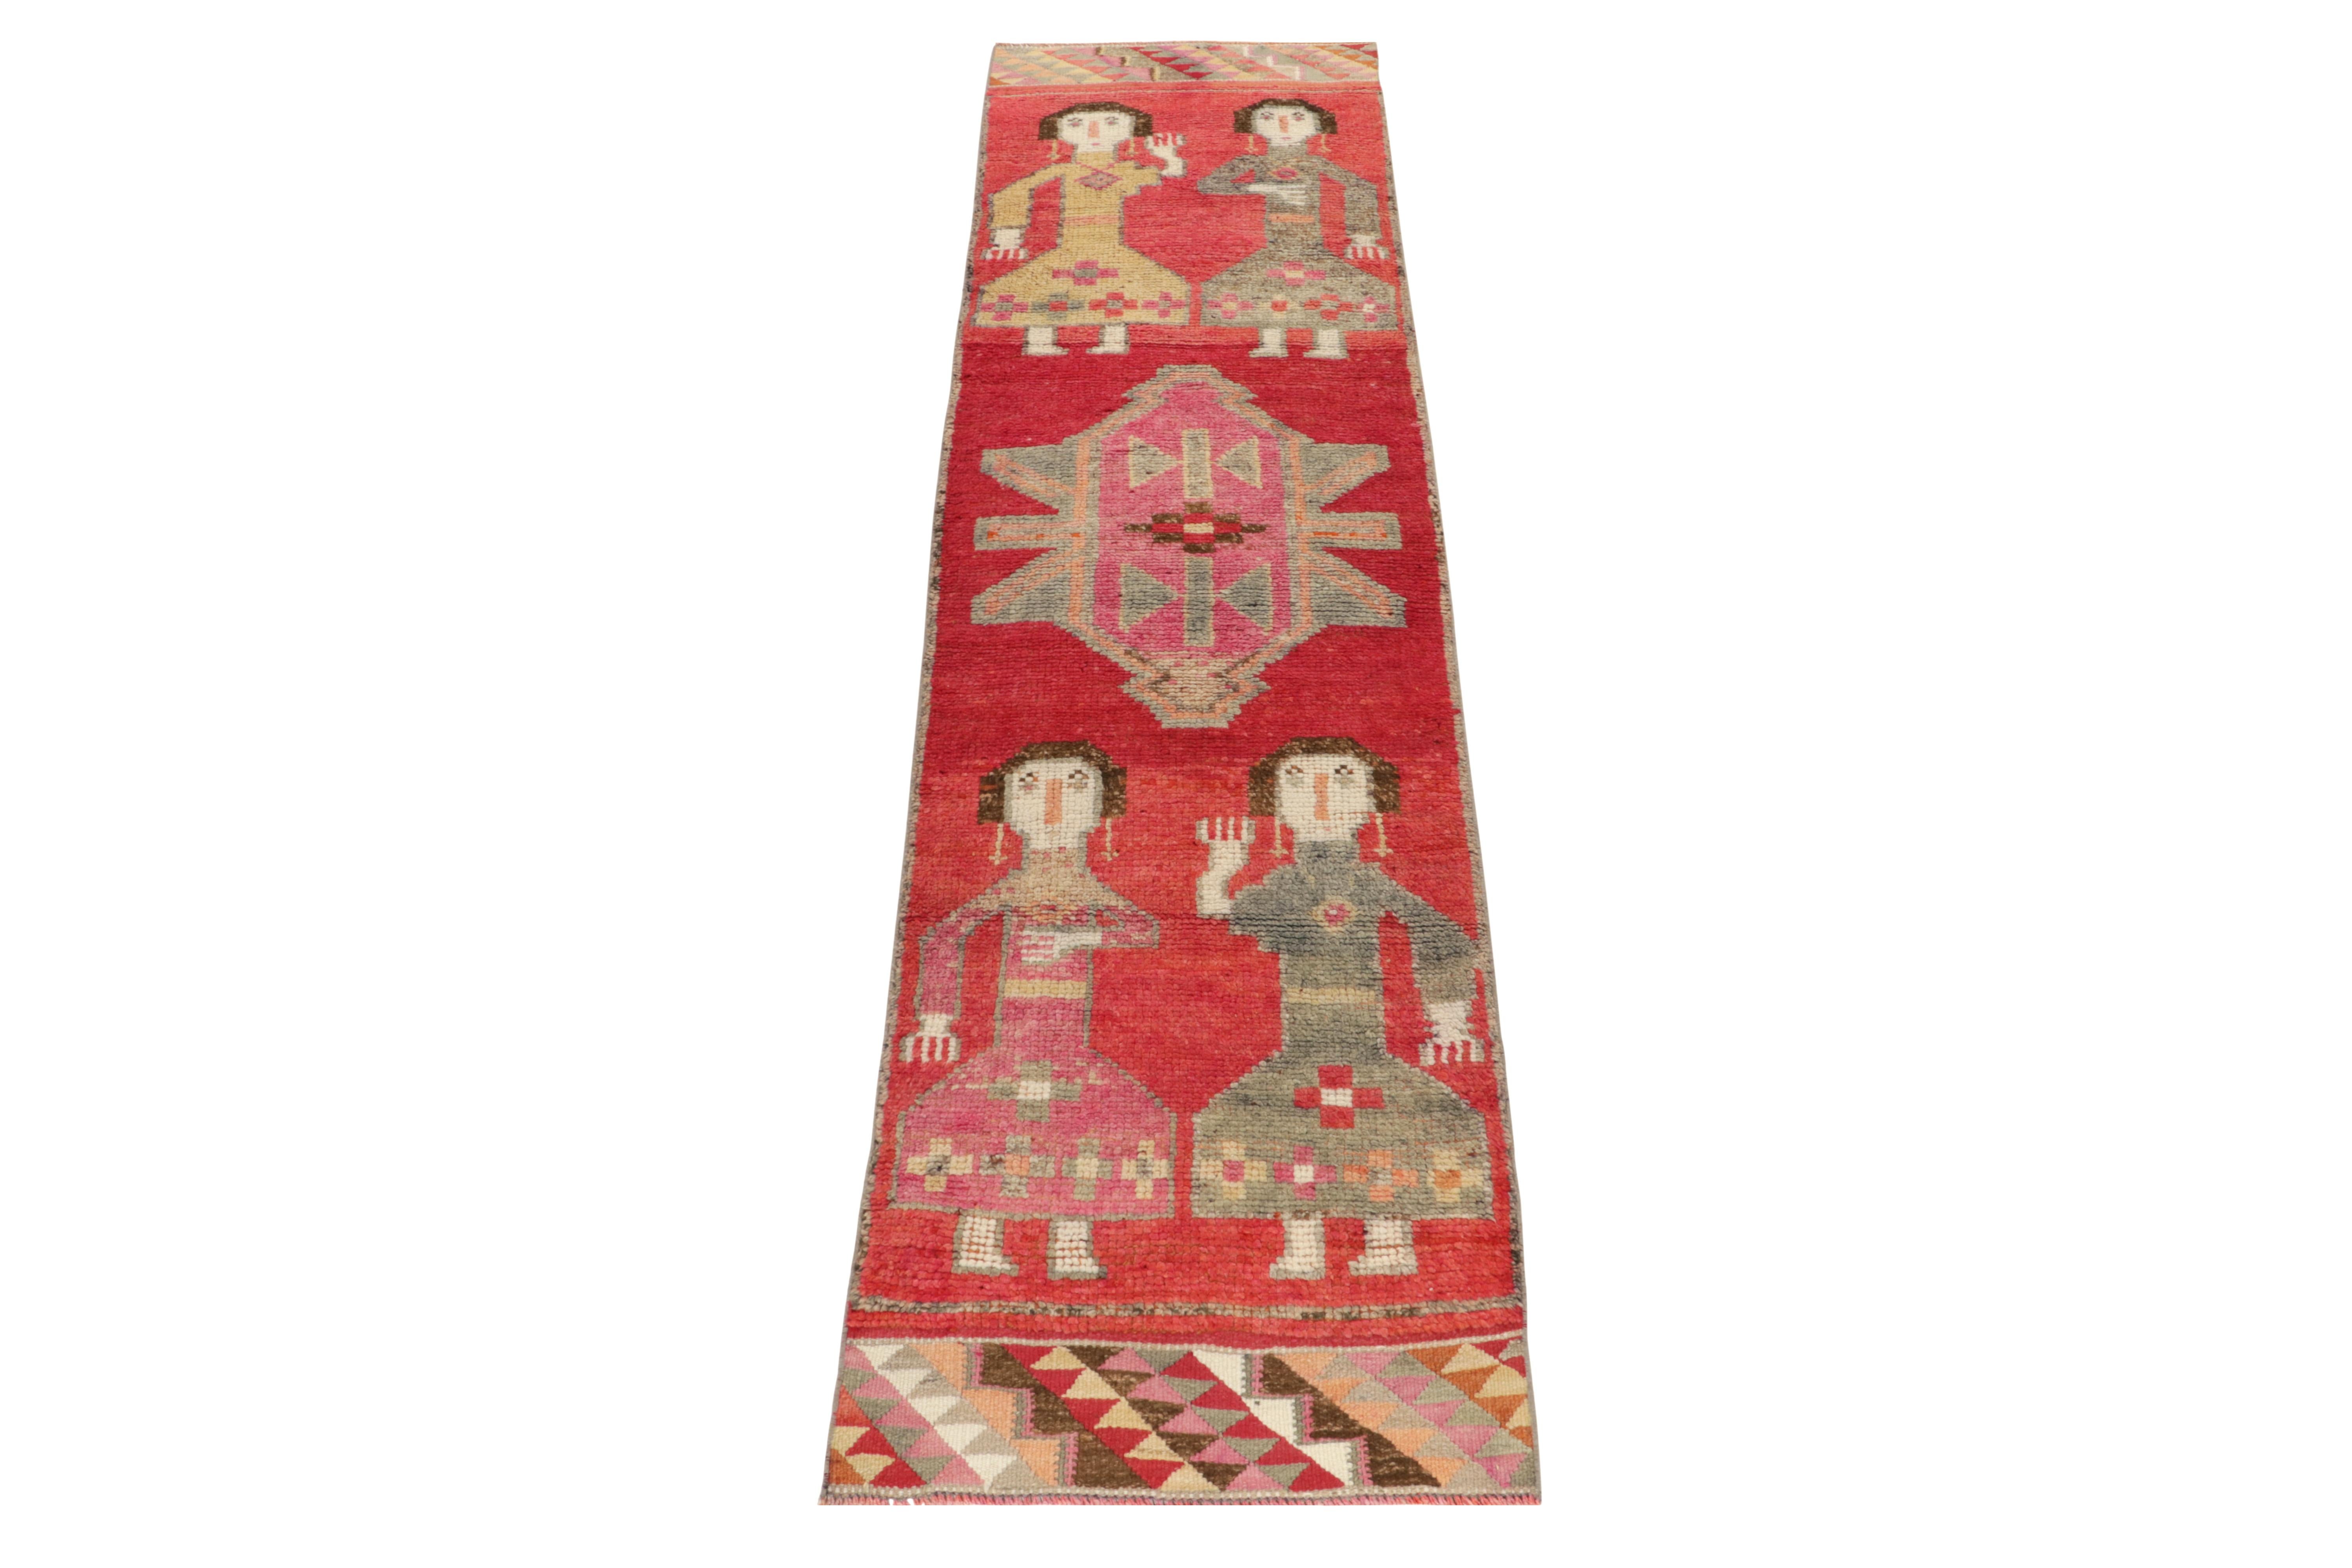 Hand-knotted in wool, a 3x11 runner from Rug & Kilim’s latest curation of rare tribal pieces. Originating from Turkey circa 1950-1960, as bold a representation of mid-century styles as it is collectible. 

The design enjoys pictorials & tribal